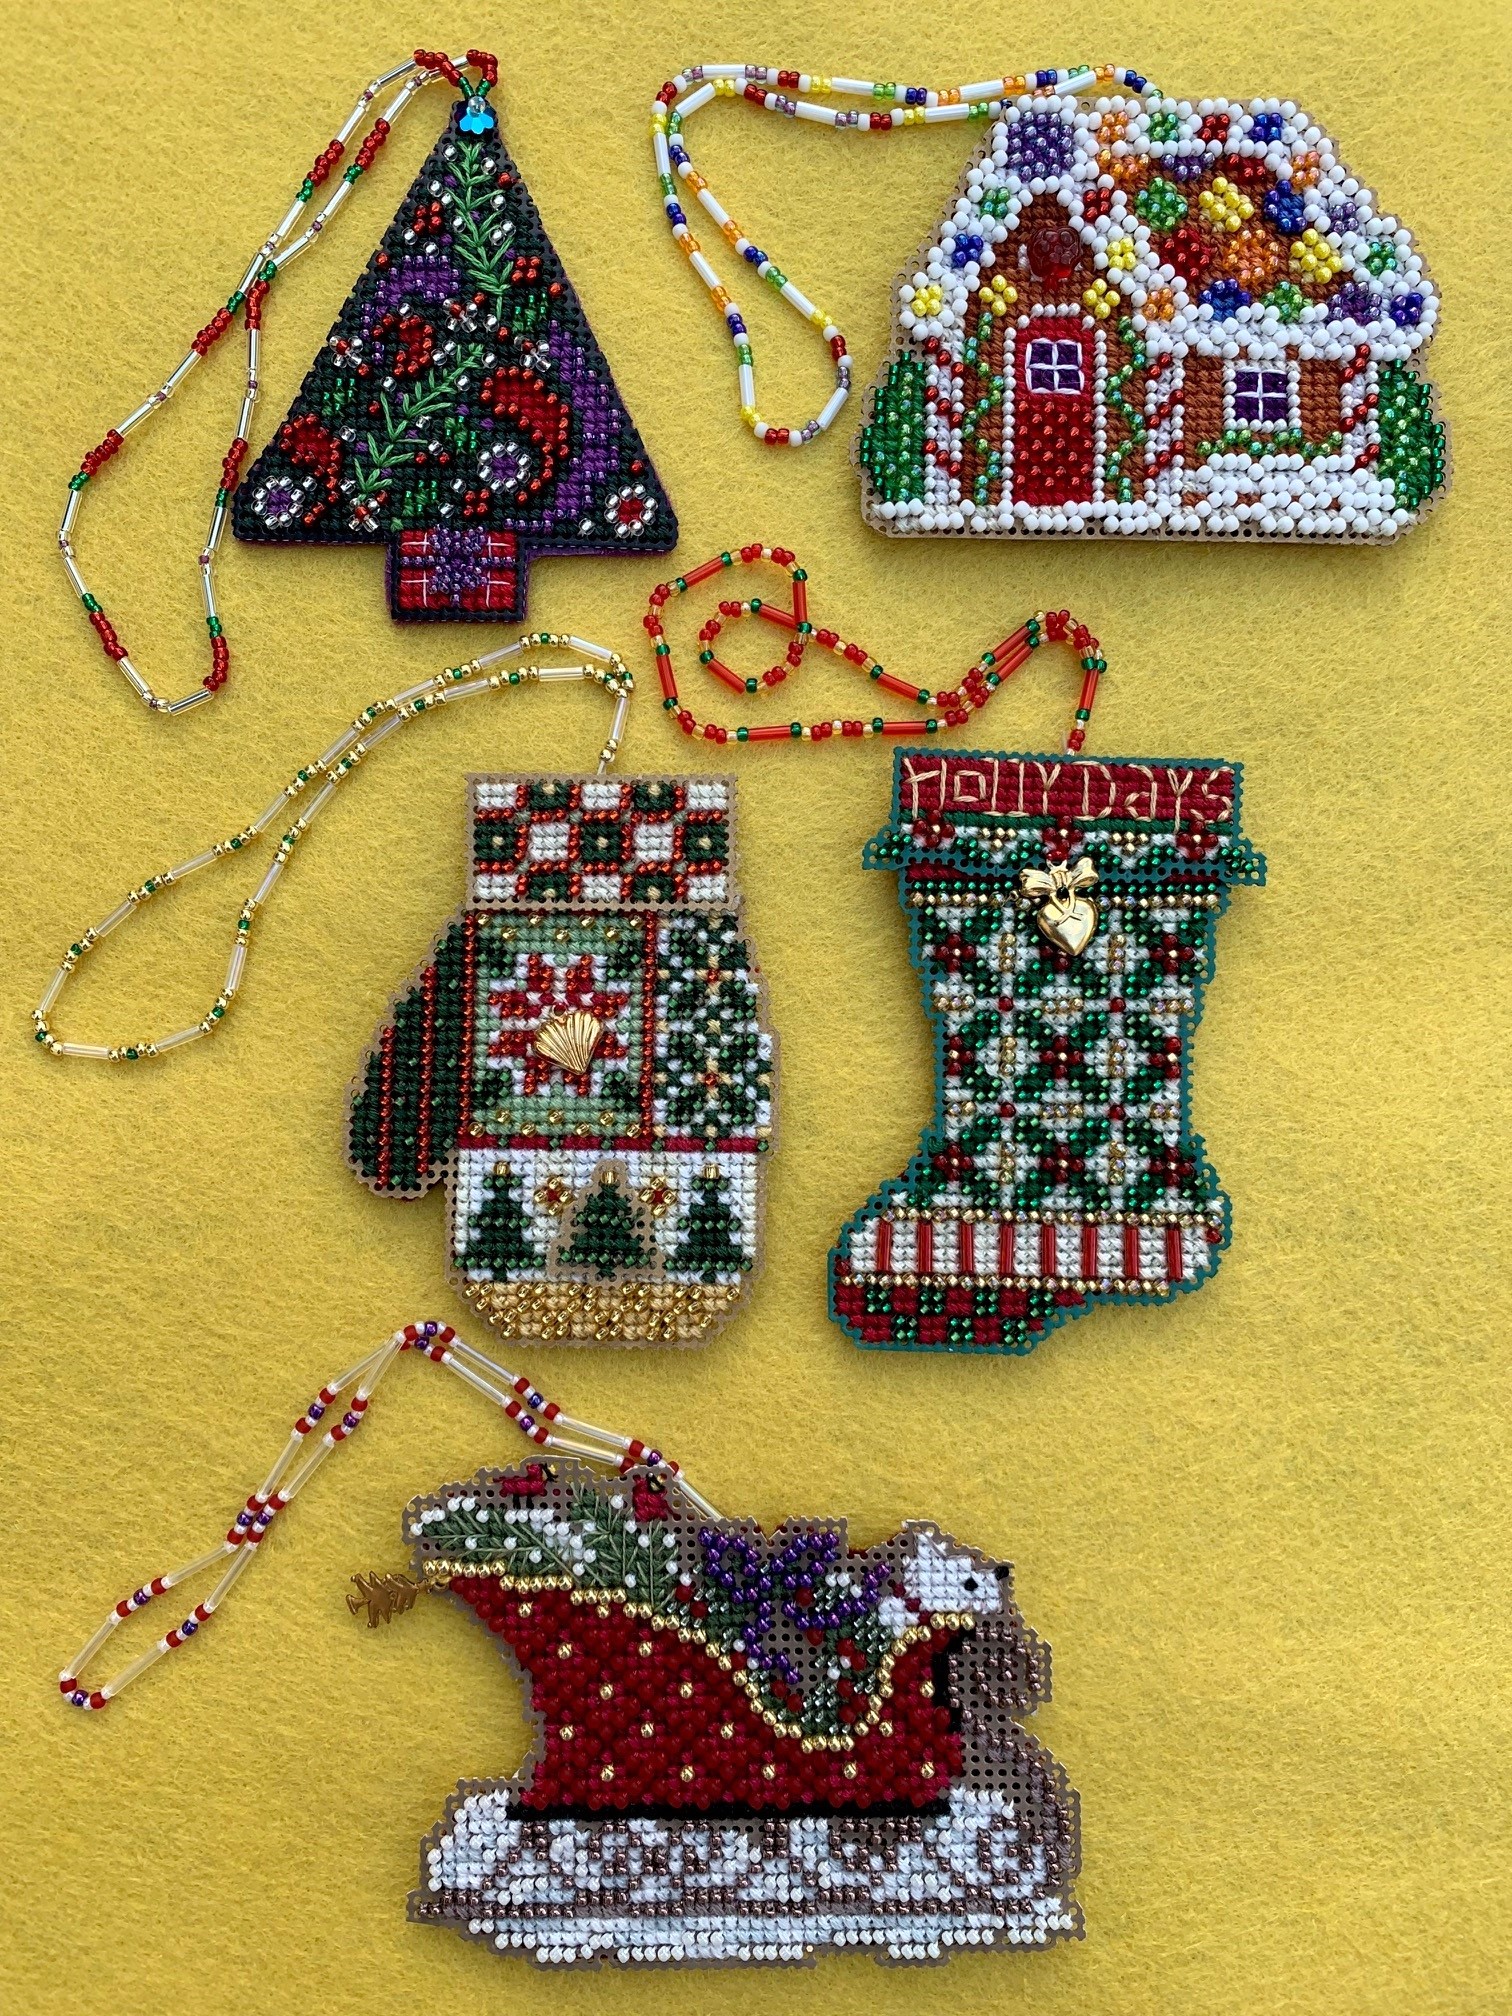 Counted Cross Stitch Pattern Twelve Days of Christmas Books -   Counted  cross stitch patterns, Christmas cross stitch, Cross stitch